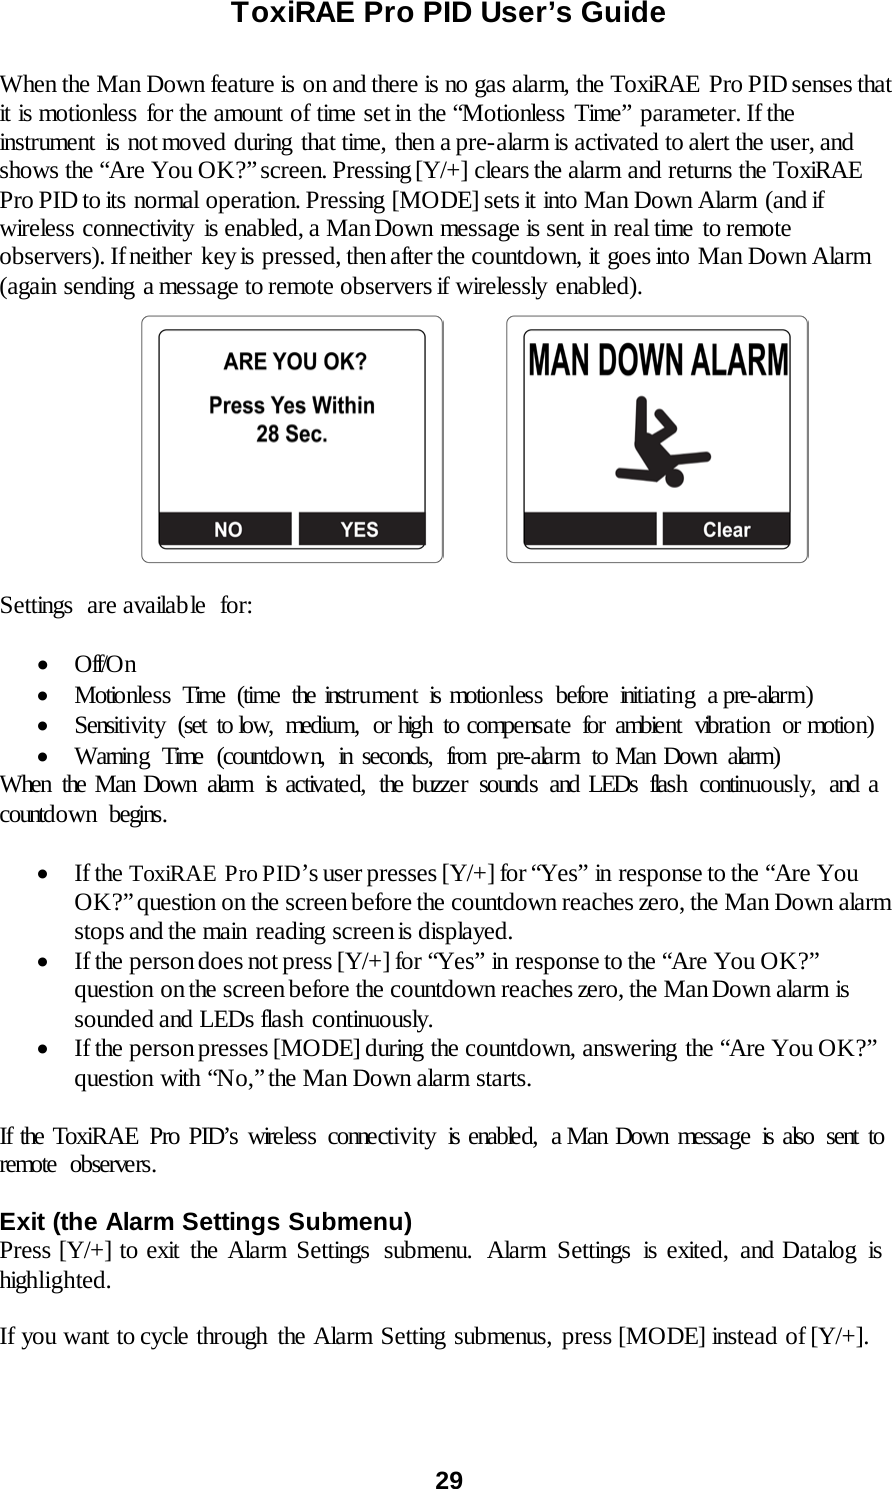 ToxiRAE Pro PID User’s Guide  29   When the Man Down feature is on and there is no gas alarm, the ToxiRAE  Pro PID senses that it is motionless for the amount of time set in the “Motionless Time” parameter. If the instrument is not moved during that time, then a pre-alarm is activated to alert the user, and shows the “Are You OK?” screen. Pressing [Y/+] clears the alarm and returns the ToxiRAE Pro PID to its normal operation. Pressing [MODE] sets it into Man Down Alarm  (and if wireless connectivity  is enabled, a Man Down message is sent in real time to remote observers). If neither  key is pressed, then after the countdown, it goes into Man Down Alarm (again sending  a message to remote observers if wirelessly  enabled).                        Settings are available for:  • Off/O n • Motionless Time (time the instrument is motionless before initiating a pre-alarm) • Sensitivity (set to low, medium, or high to compensate for ambient vibration or motion) • Warning Time (countdown, in seconds, from pre-alarm to Man Down alarm) When the Man Down alarm  is activated,  the buzzer sounds and LEDs flash  continuously,  and a countdown begins.   • If the ToxiRAE  Pro PID’s user presses [Y/+] for “Yes” in response to the “Are You OK?” question on the screen before the countdown reaches zero, the Man Down alarm stops and the main  reading screen is displayed. • If the person does not press [Y/+] for “Yes” in response to the “Are You OK?” question on the screen before the countdown reaches zero, the Man Down alarm is sounded and LEDs flash continuously.   • If the person presses [MODE] during the countdown, answering the “Are You OK?” question with “No,” the Man Down alarm starts.  If the ToxiRAE Pro PID’s wireless connectivity  is enabled,  a Man Down message is also sent to remote observers.    Exit (the Alarm Settings Submenu) Press [Y/+] to exit the Alarm Settings  submenu.  Alarm  Settings  is exited, and Datalog  is highlighted.  If you want to cycle through the Alarm Setting submenus, press [MODE] instead of [Y/+].  